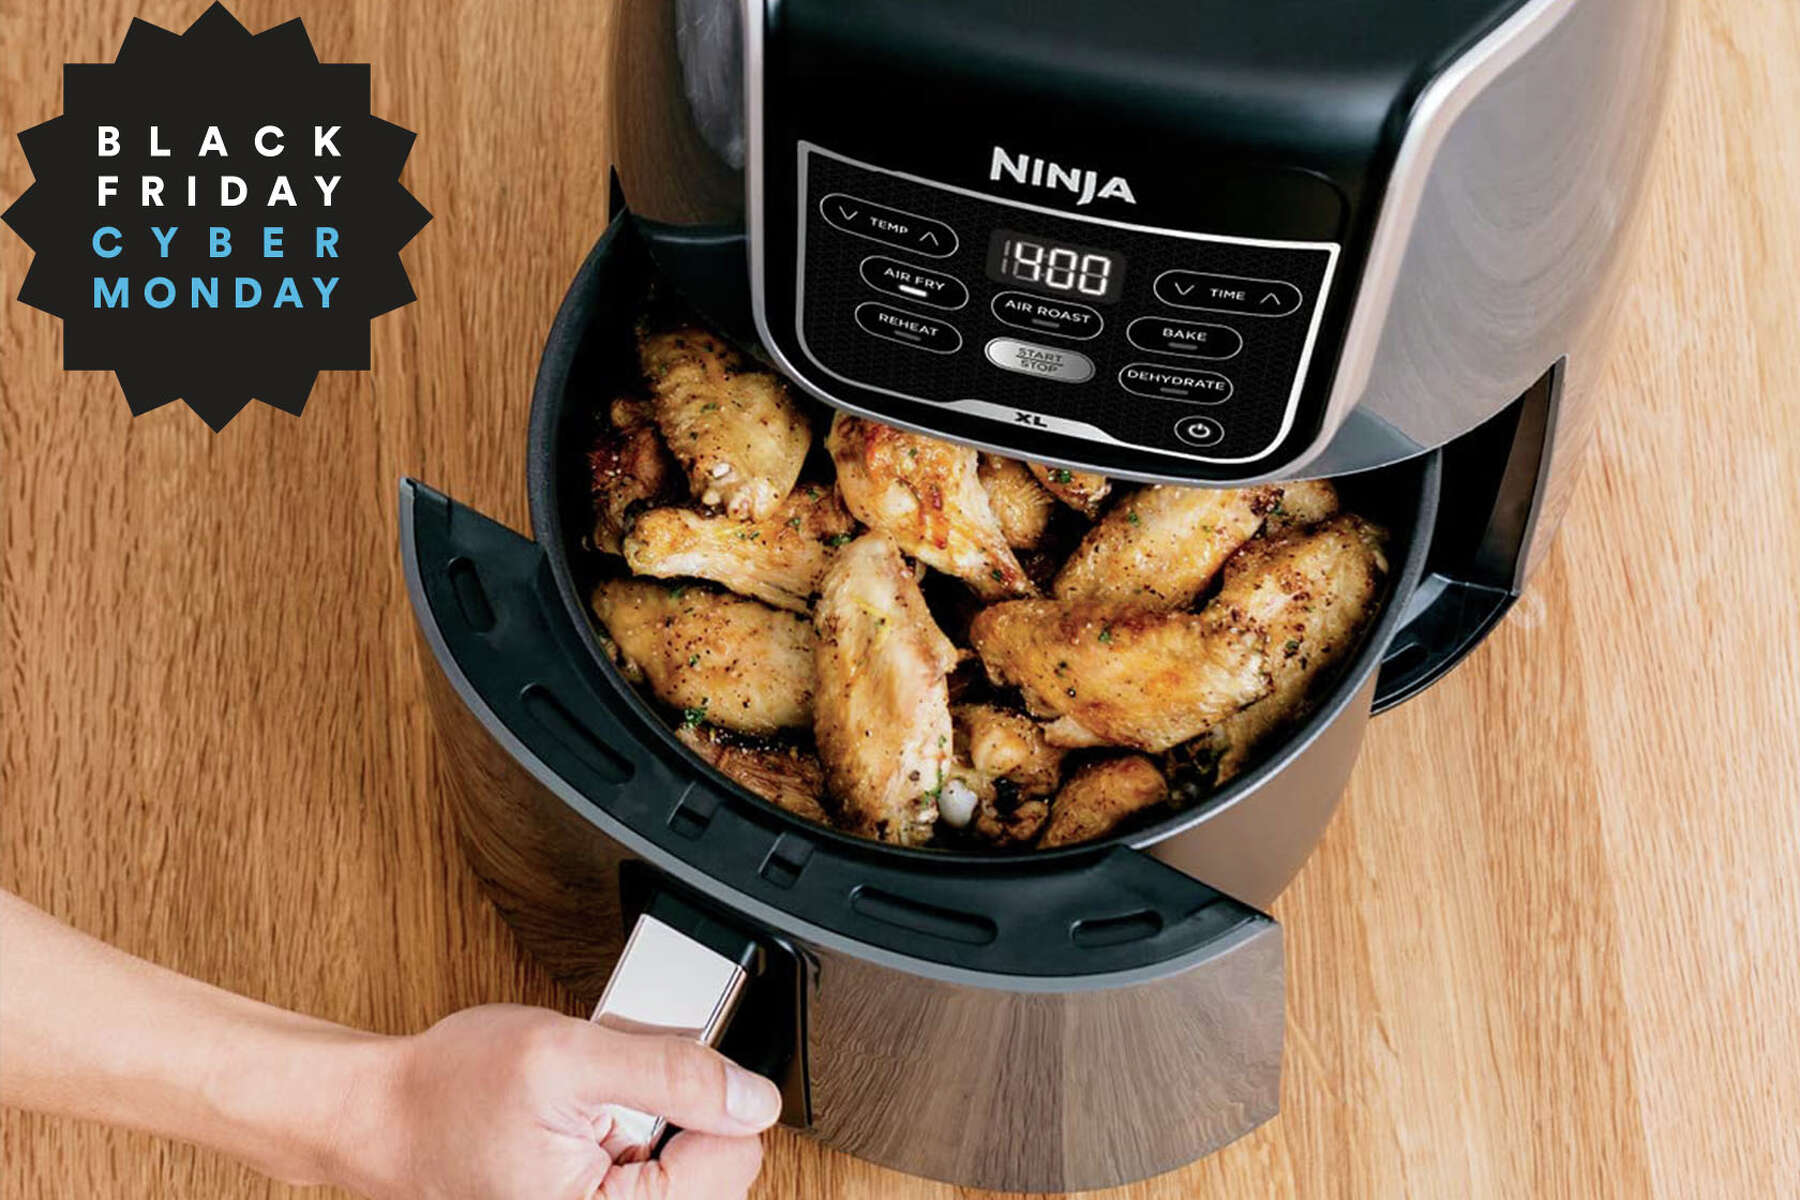 The Ninja Foodi air fryer is on sale for early Cyber Monday 2022